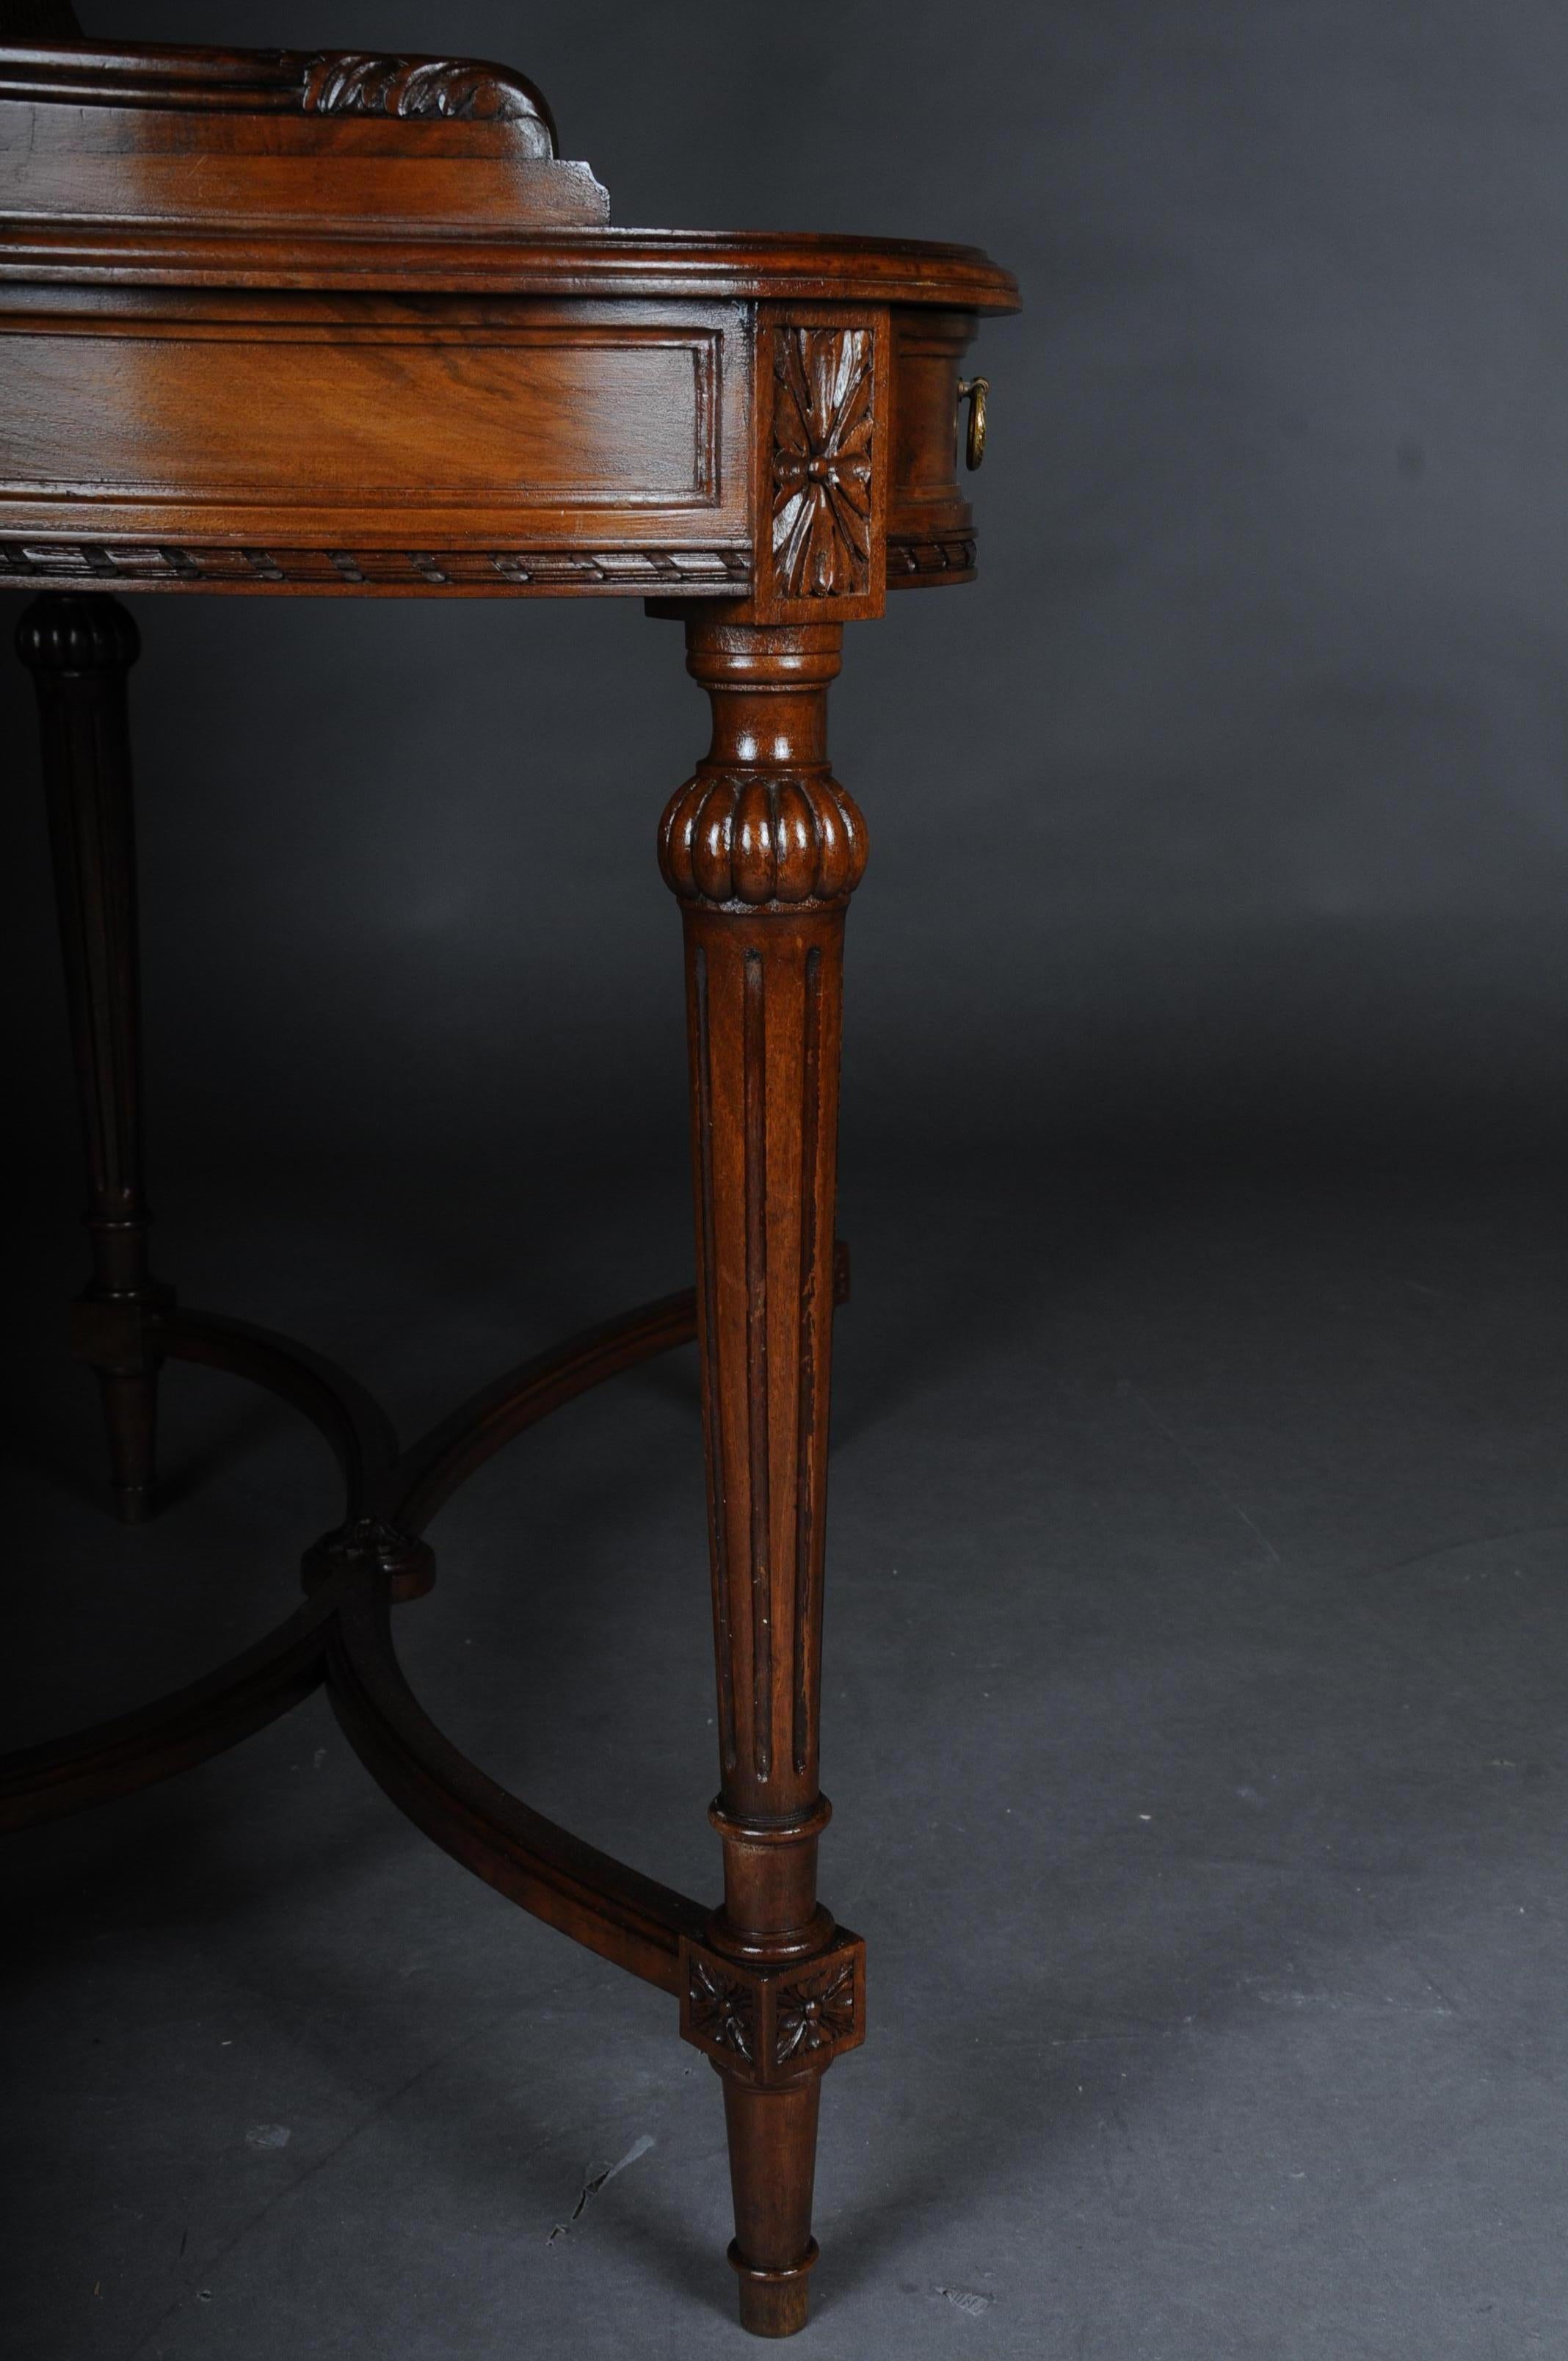 Hand-Carved French Dressing Table / Vanity Table with Mirror Classicism